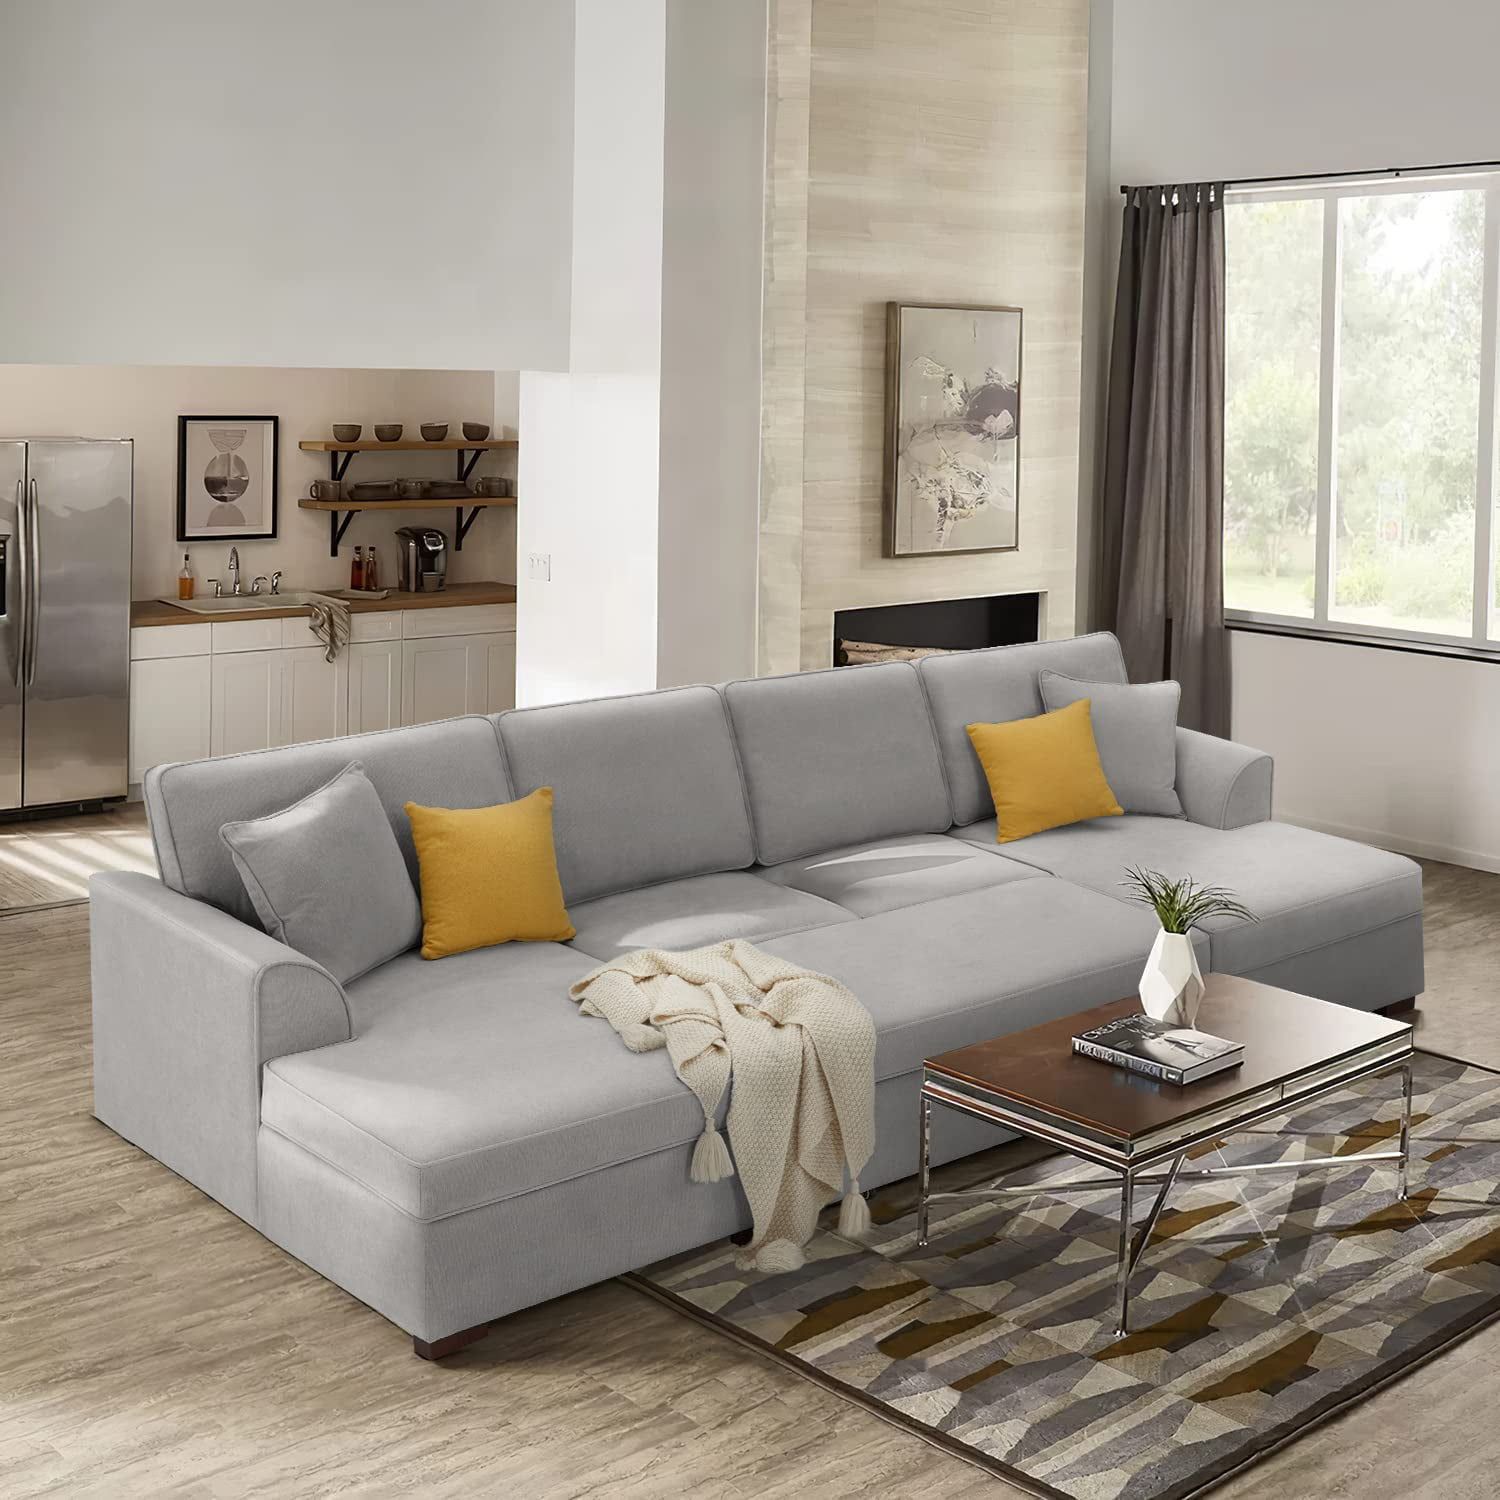 Mellcom U Shaped Sectional Sofa With Pull Out Bed, Upholstered Modular Couch  With Storage, Gray – Walmart Pertaining To Upholstered Modular Couches With Storage (Photo 11 of 15)